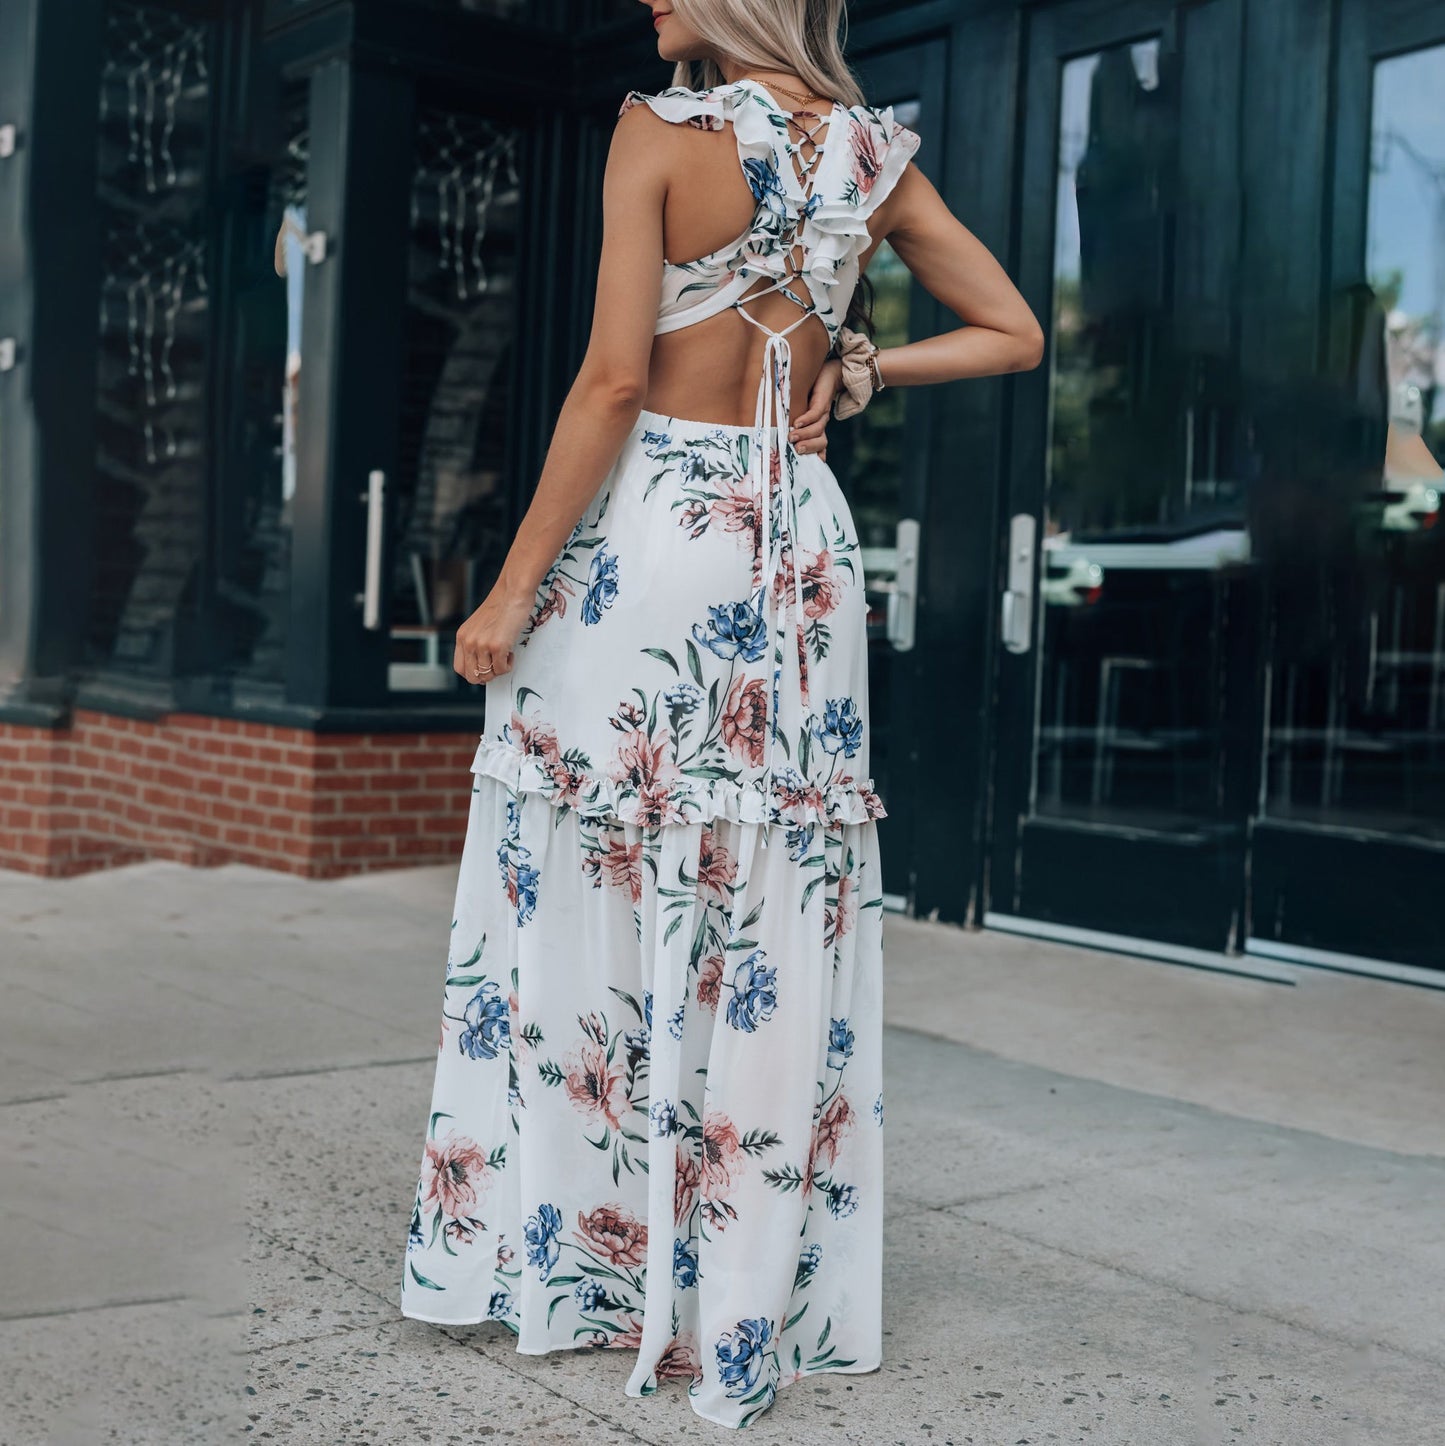 Fashion halter lace-up ruffled floral dress